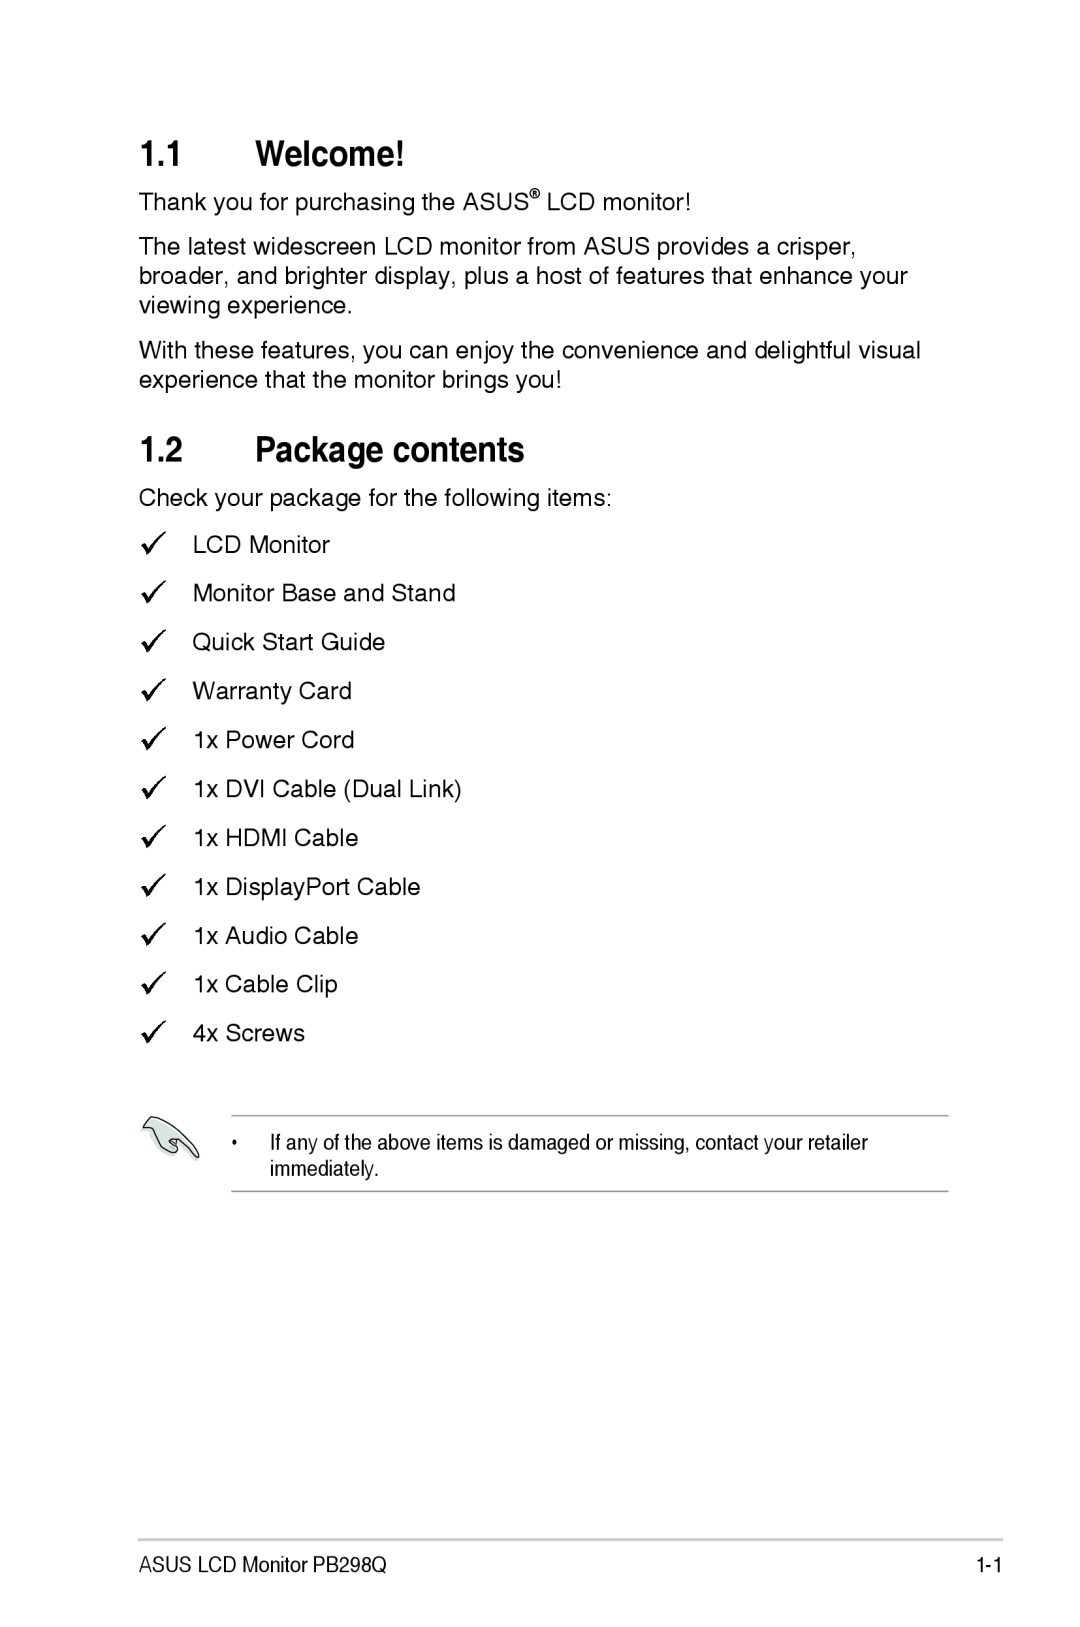 Asus PB298Q manual Welcome, Package contents 